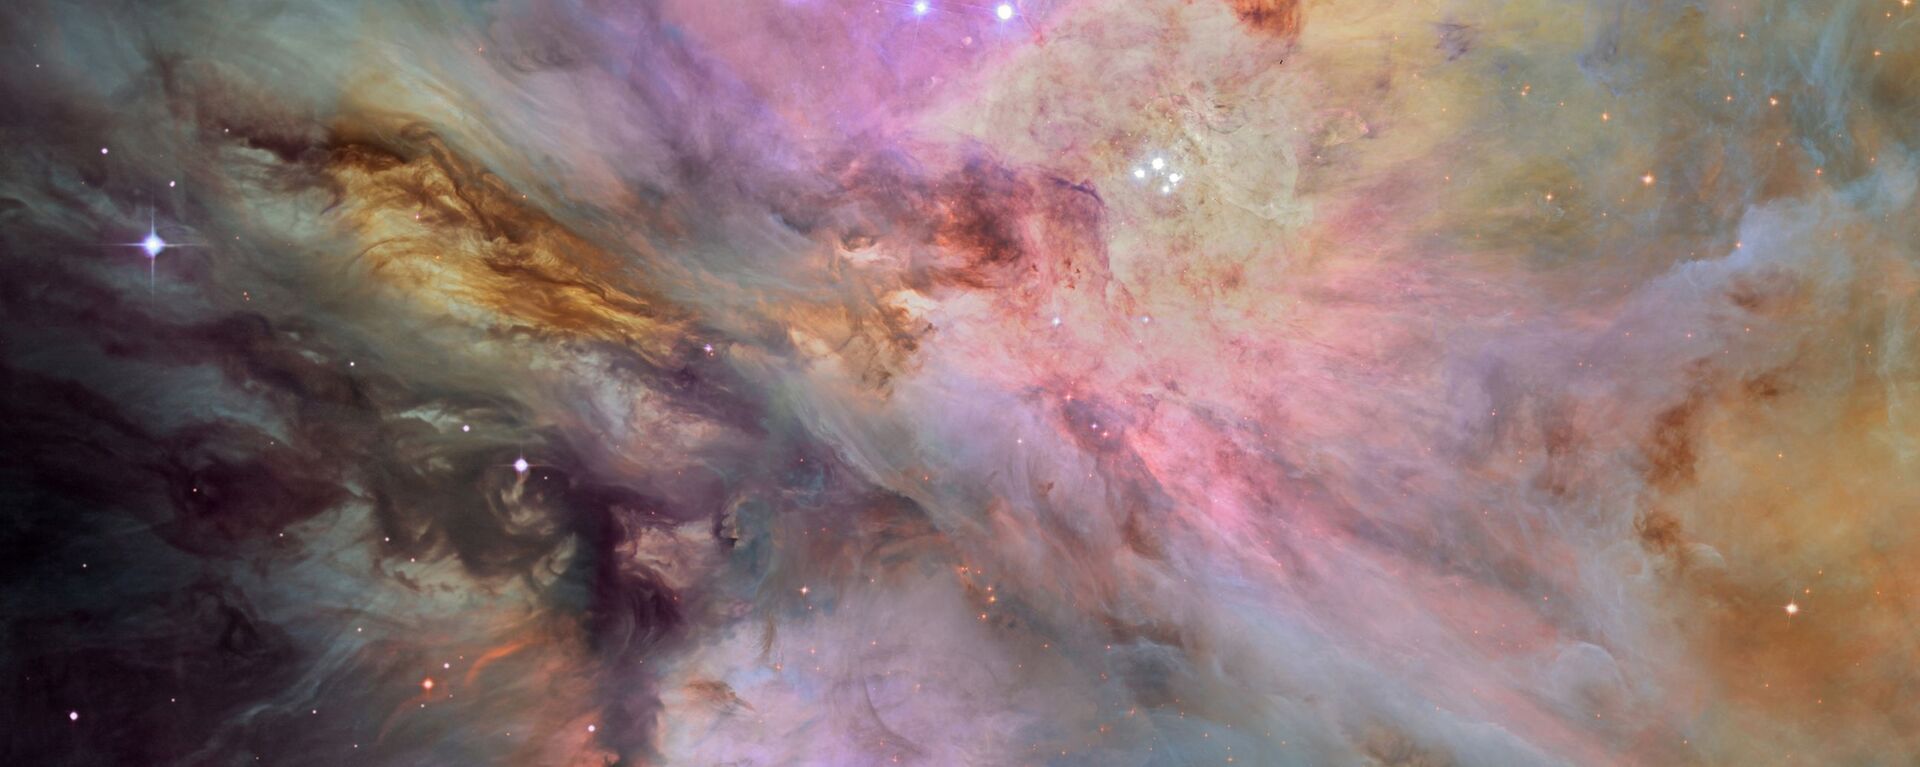 The Great Nebula in Orion, an immense, nearby starbirth region, is probably the most famous of all astronomical nebulae. - Sputnik International, 1920, 22.01.2020